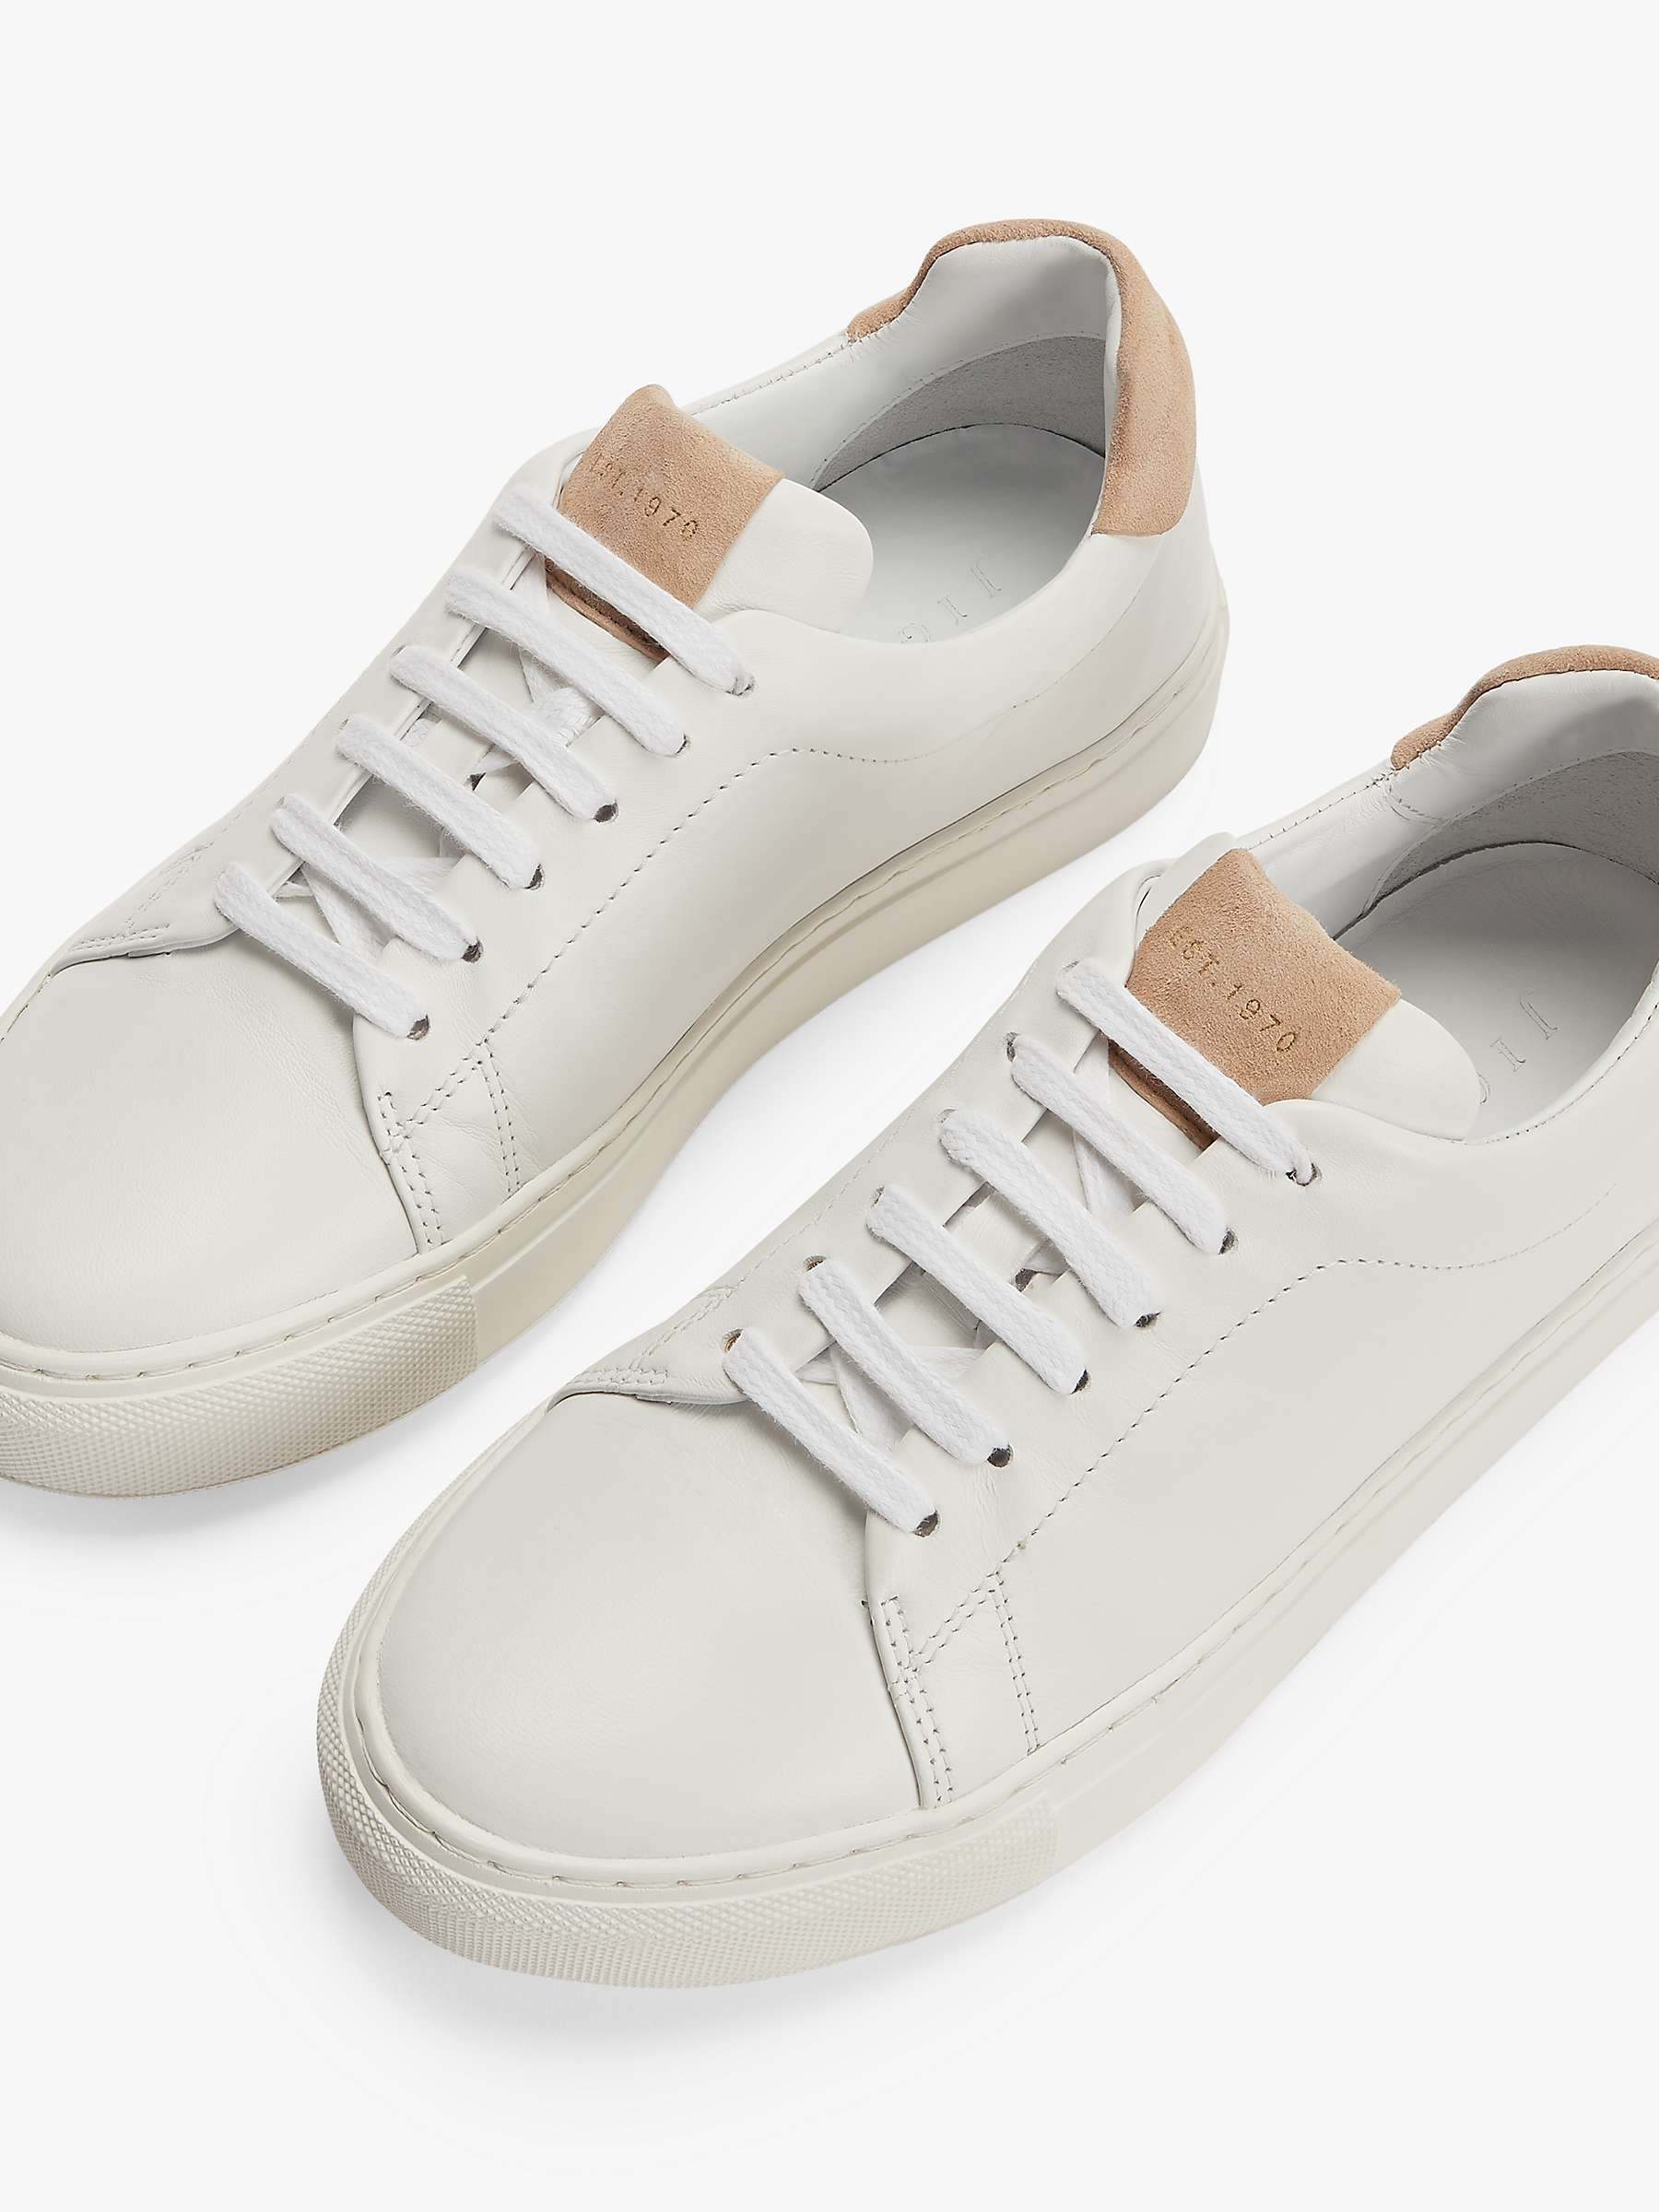 Jigsaw Miah Leather Lace Up Trainers, Neutral at John Lewis & Partners